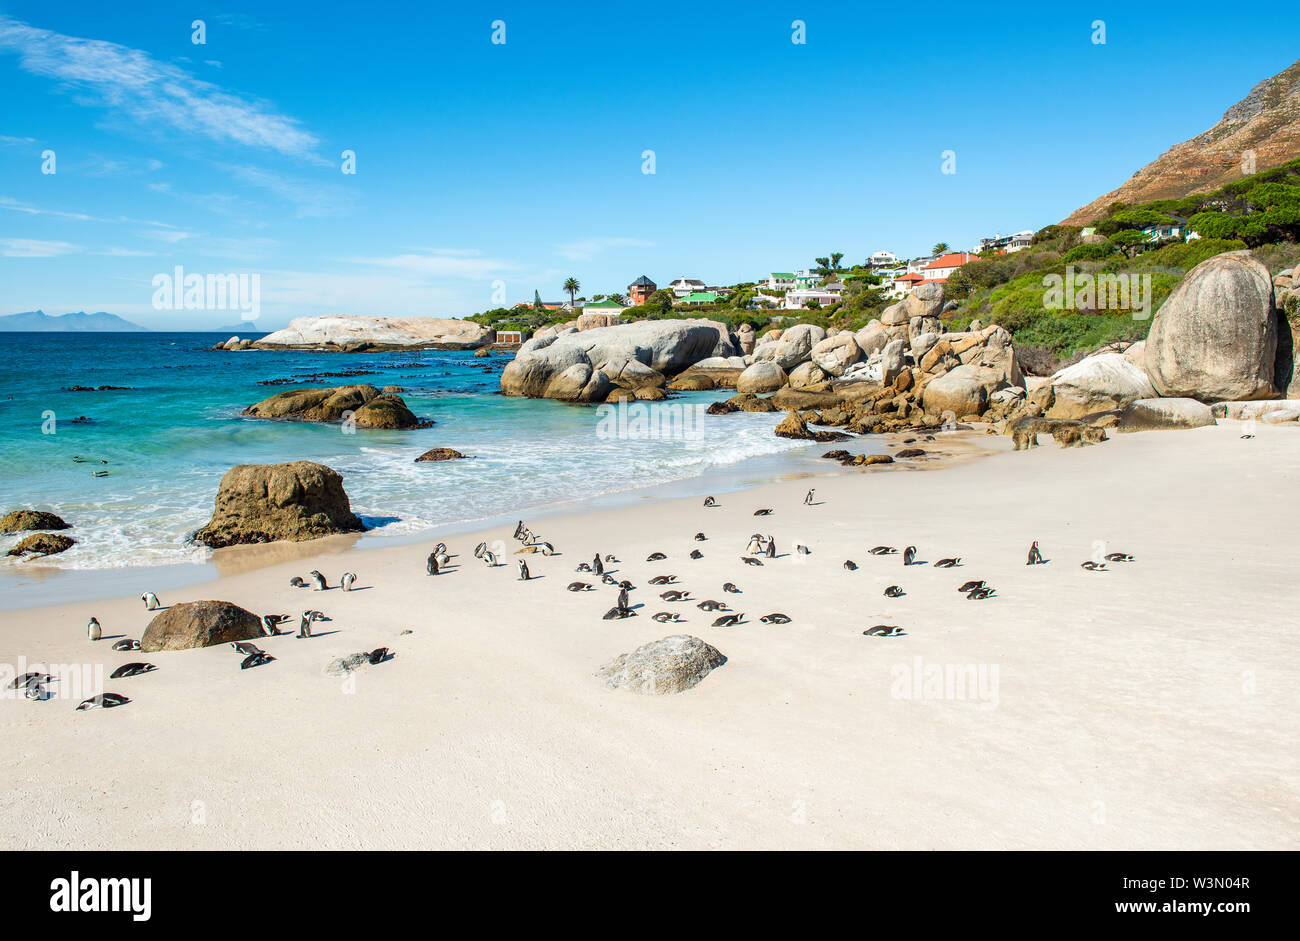 Big boulder rocks and African or Jackass Penguins (Spheniscus Demersus) on Boulder Beach near Cape town, South Africa. Stock Photo